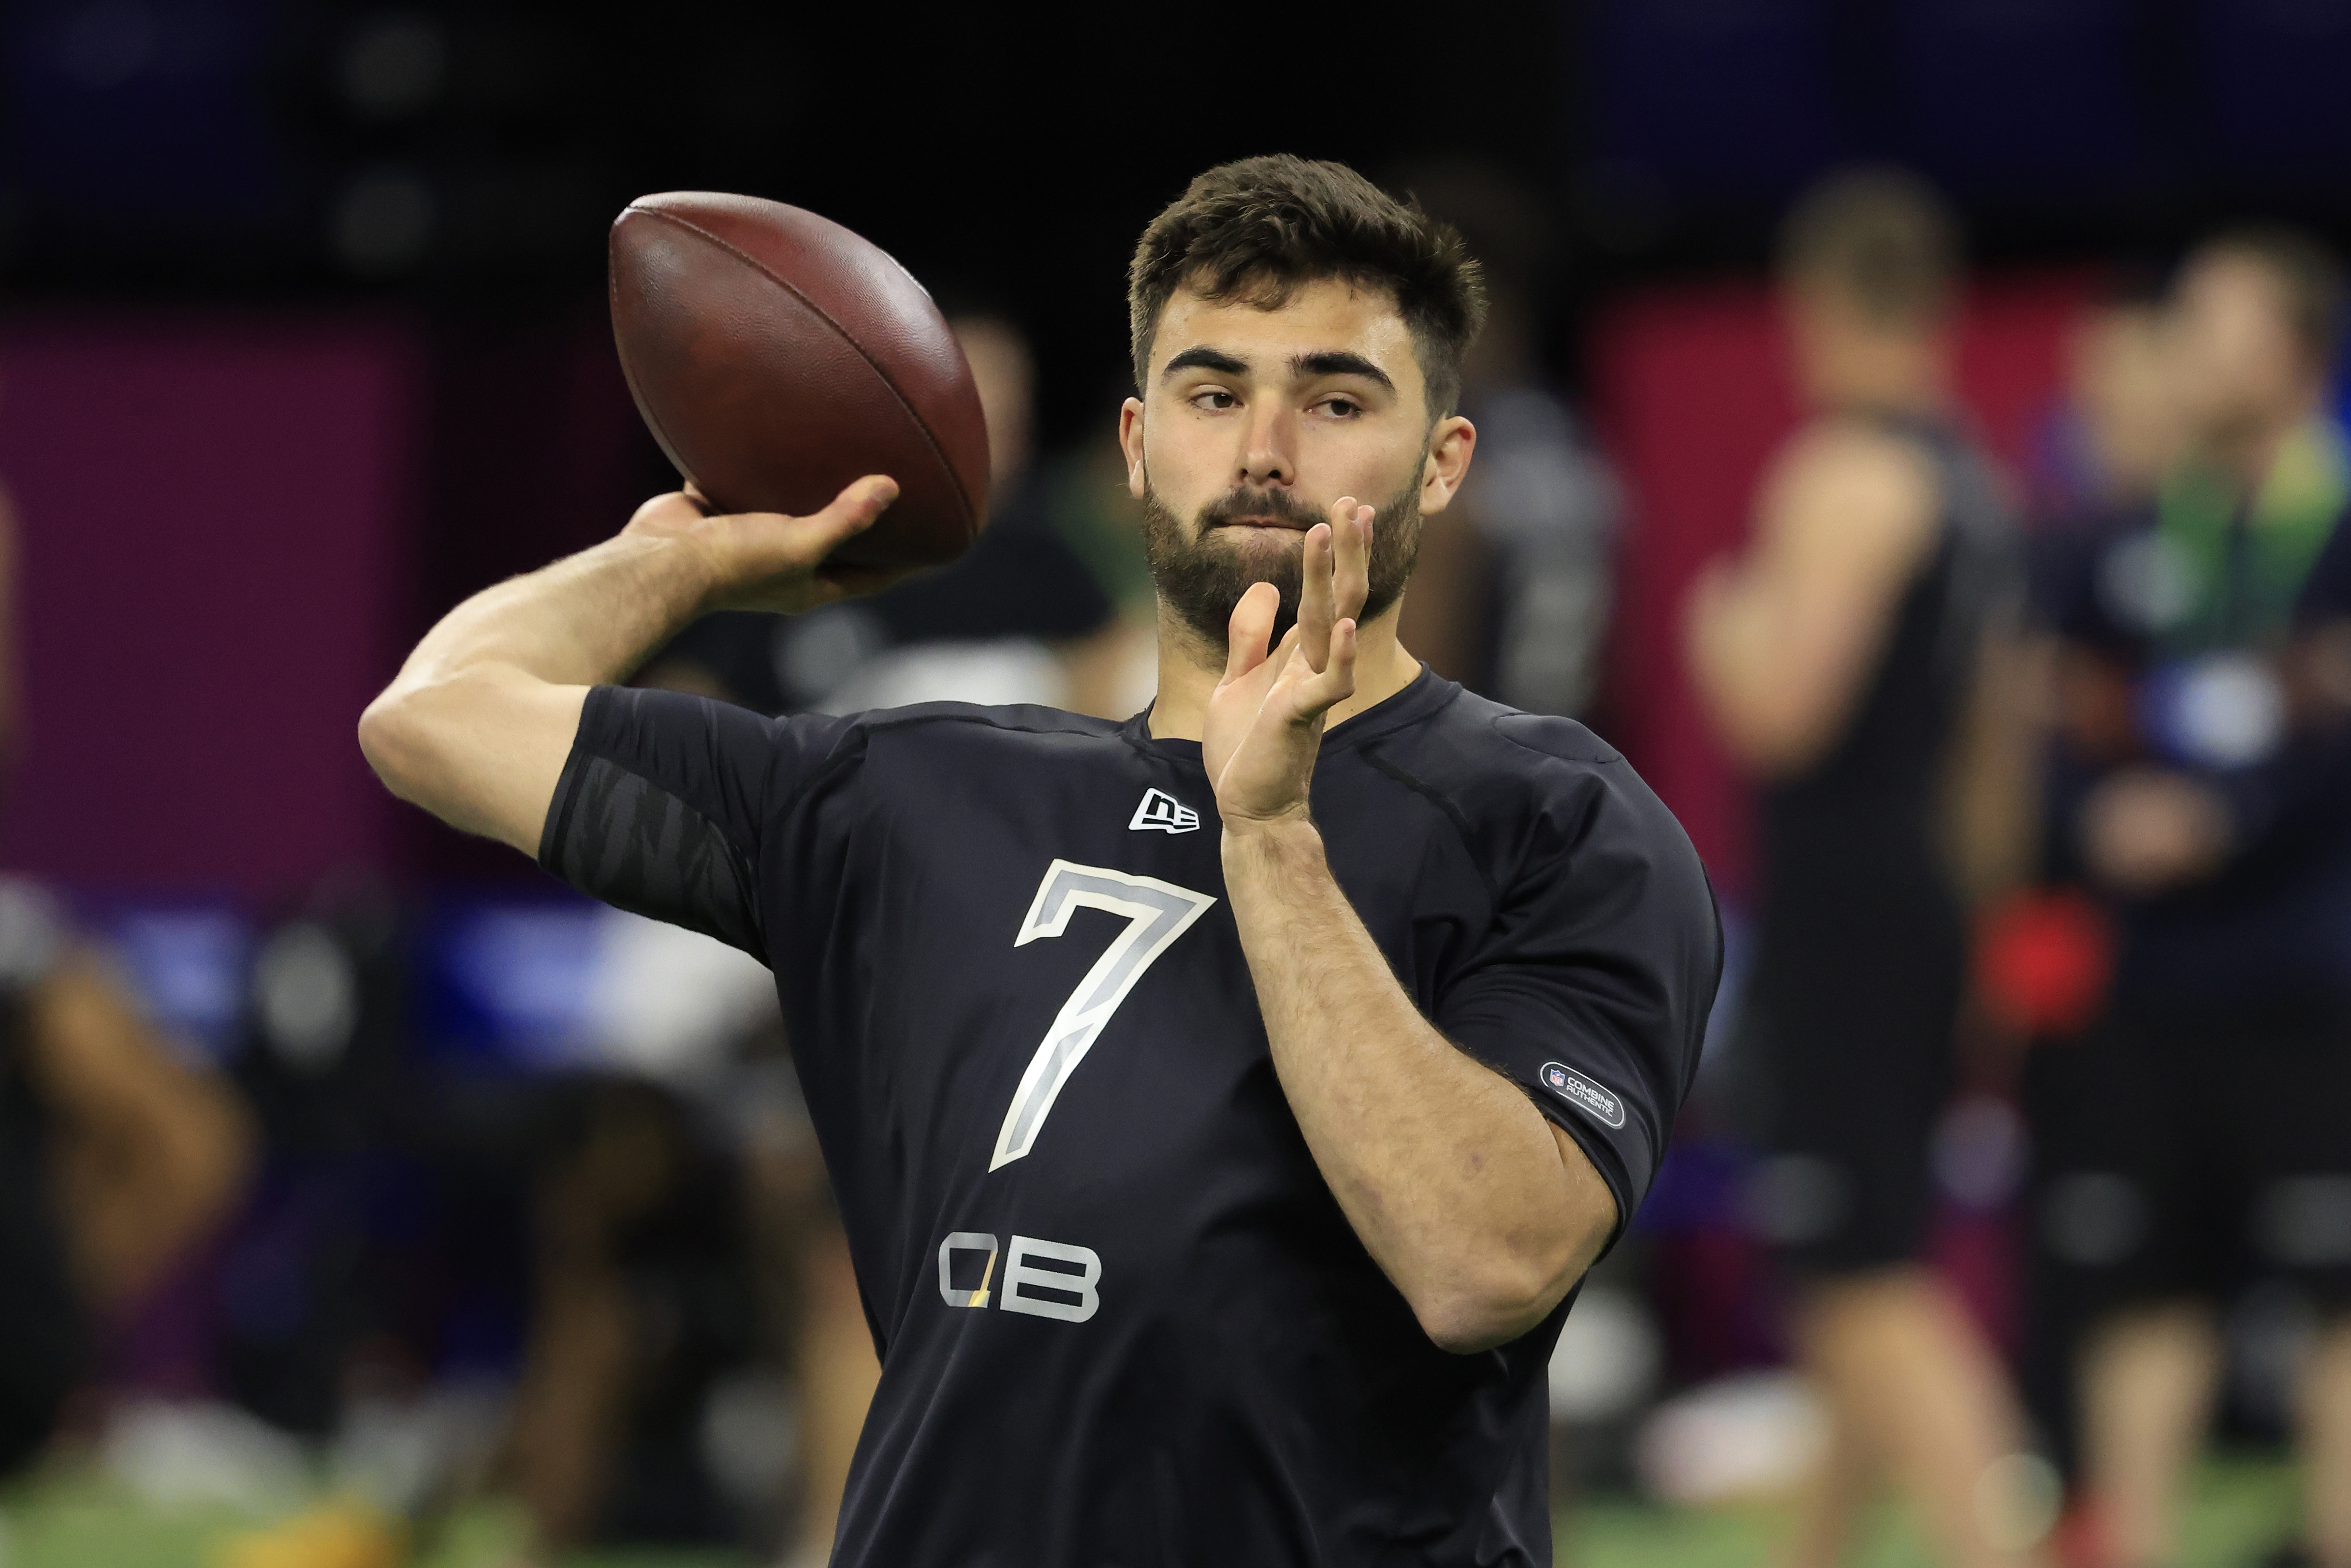 Sam Howell #QB07 of the North Carolina Tar Heels throws during the NFL Combine at Lucas Oil Stadium on March 03, 2022 in Indianapolis, Indiana.